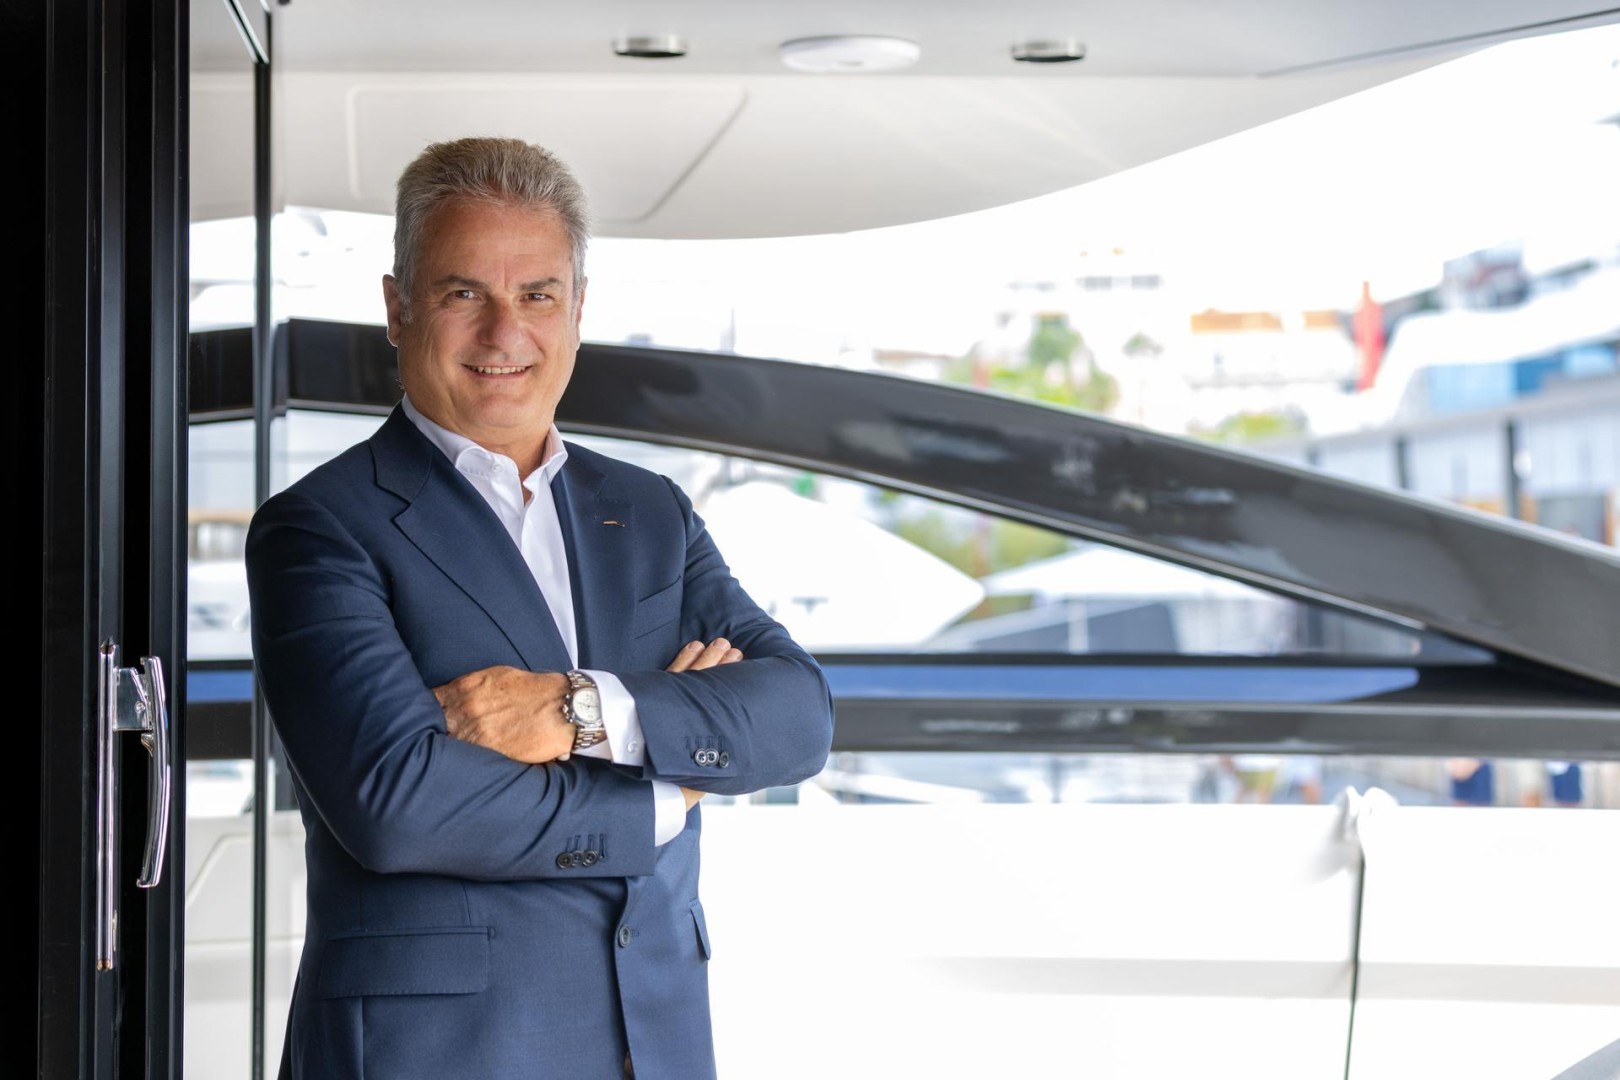 Azimut announces the appointment of Daniele Romiti as General Manager